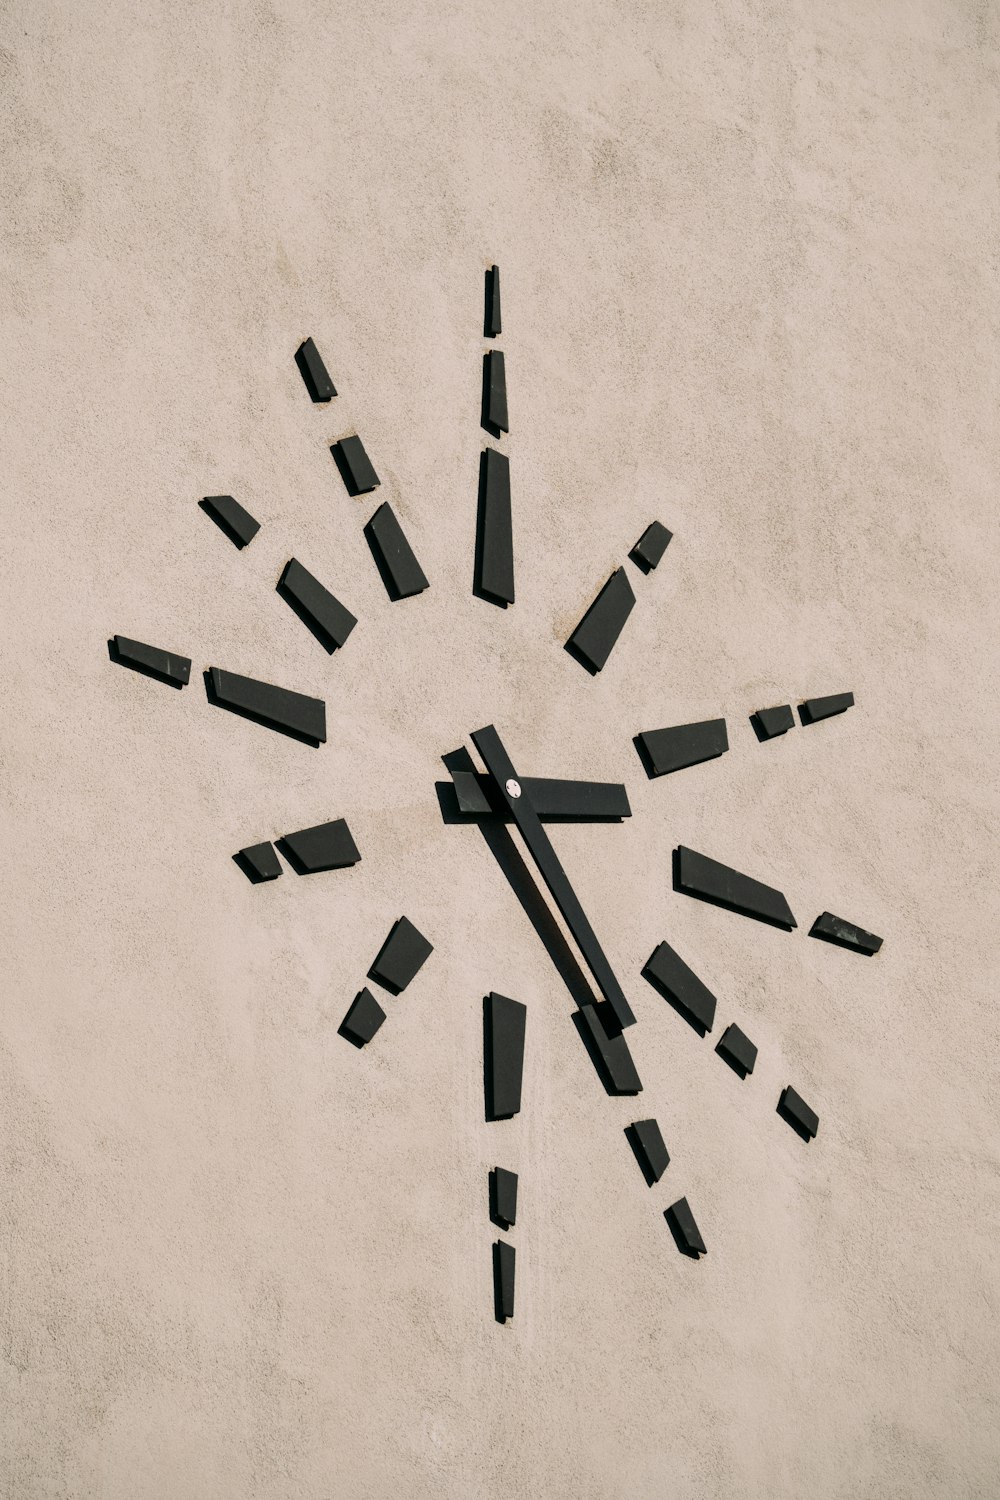 a clock made out of black pieces of wood